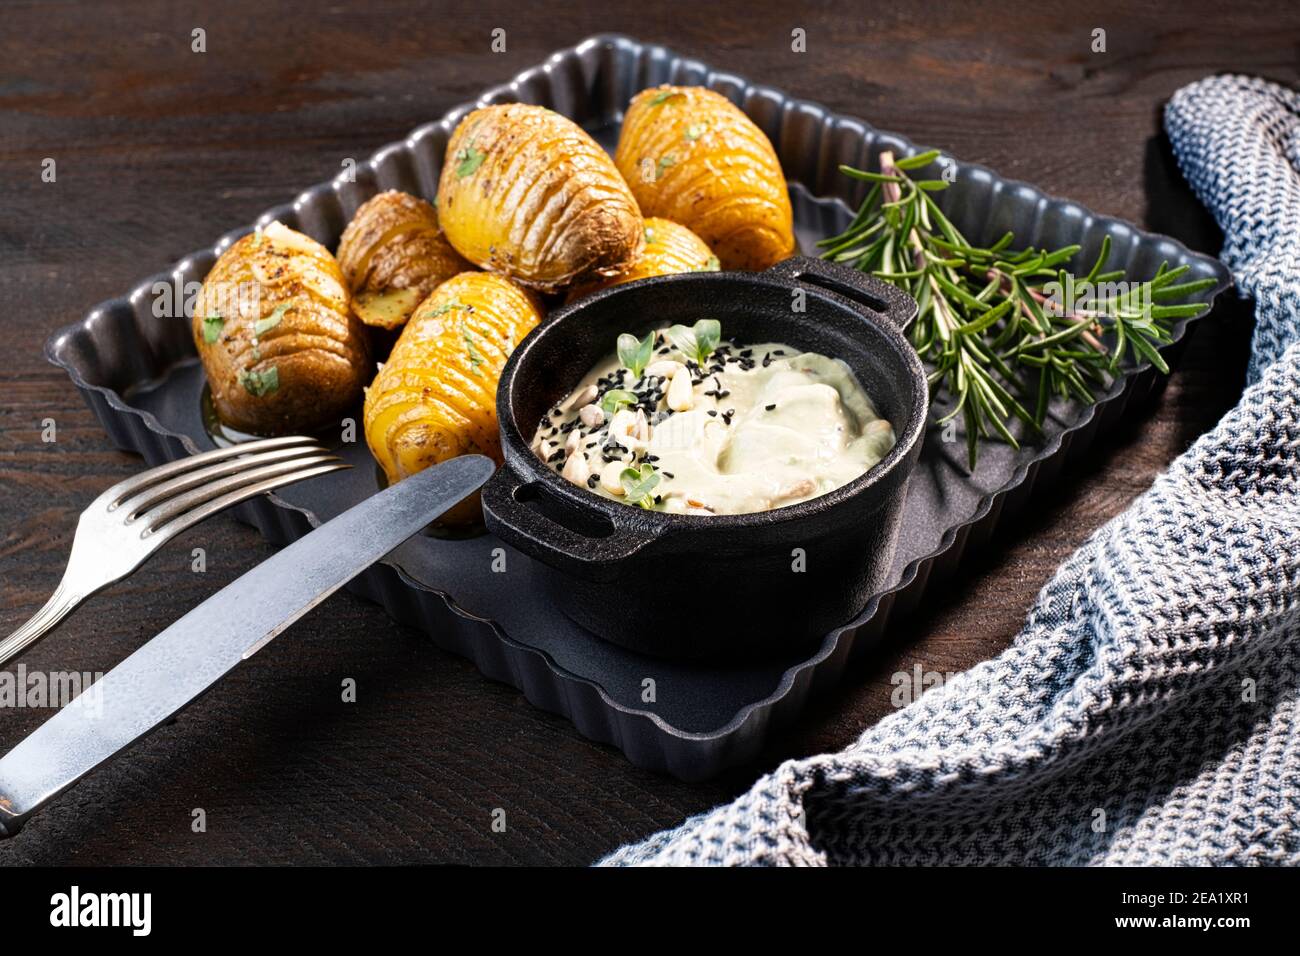 Baked pan baked potatoes (baked potatoes) in a black cast iron round skillet with garlic and olive oil, served with an avocado dip Stock Photo